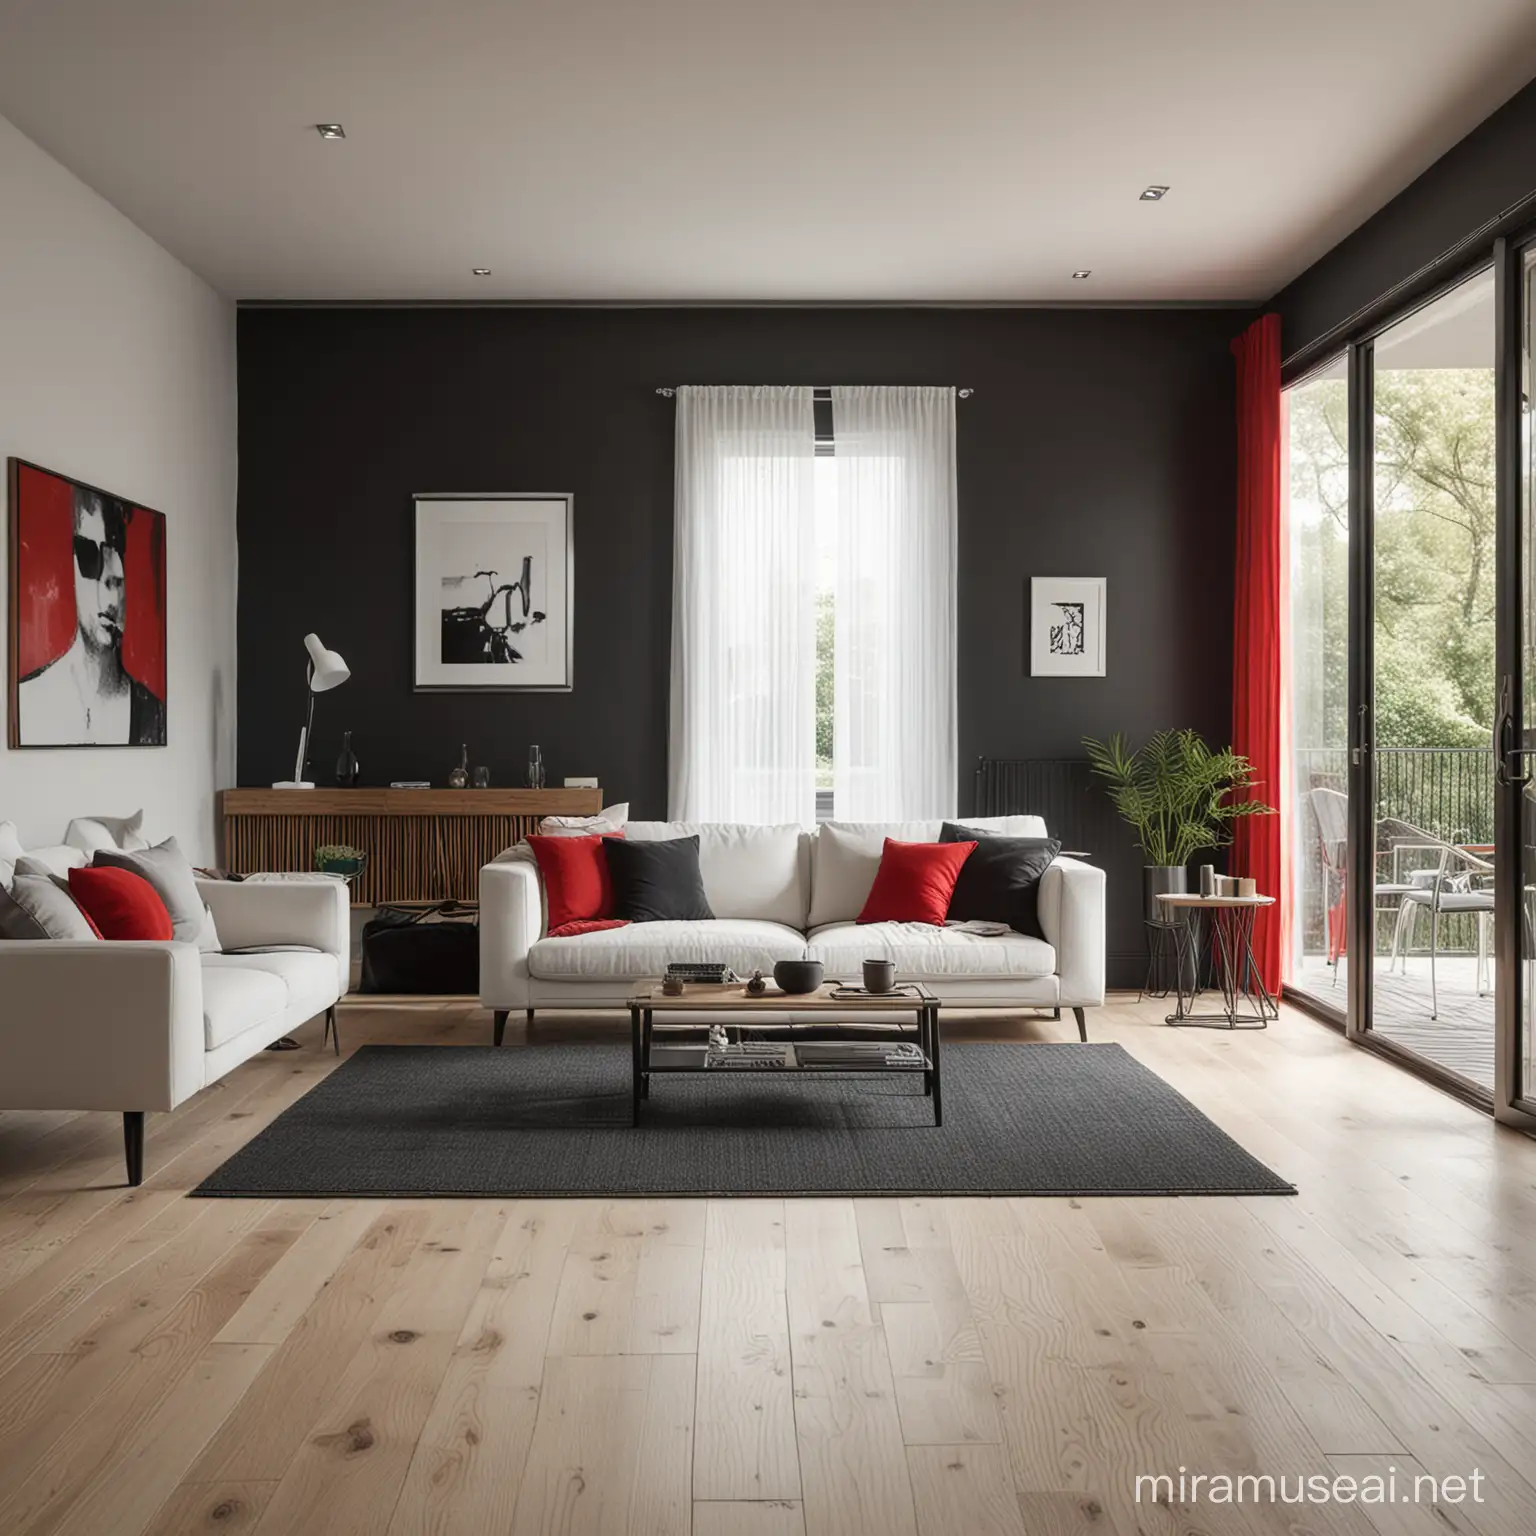 Modern Black and White Living Room with Red Sofa and Artwork